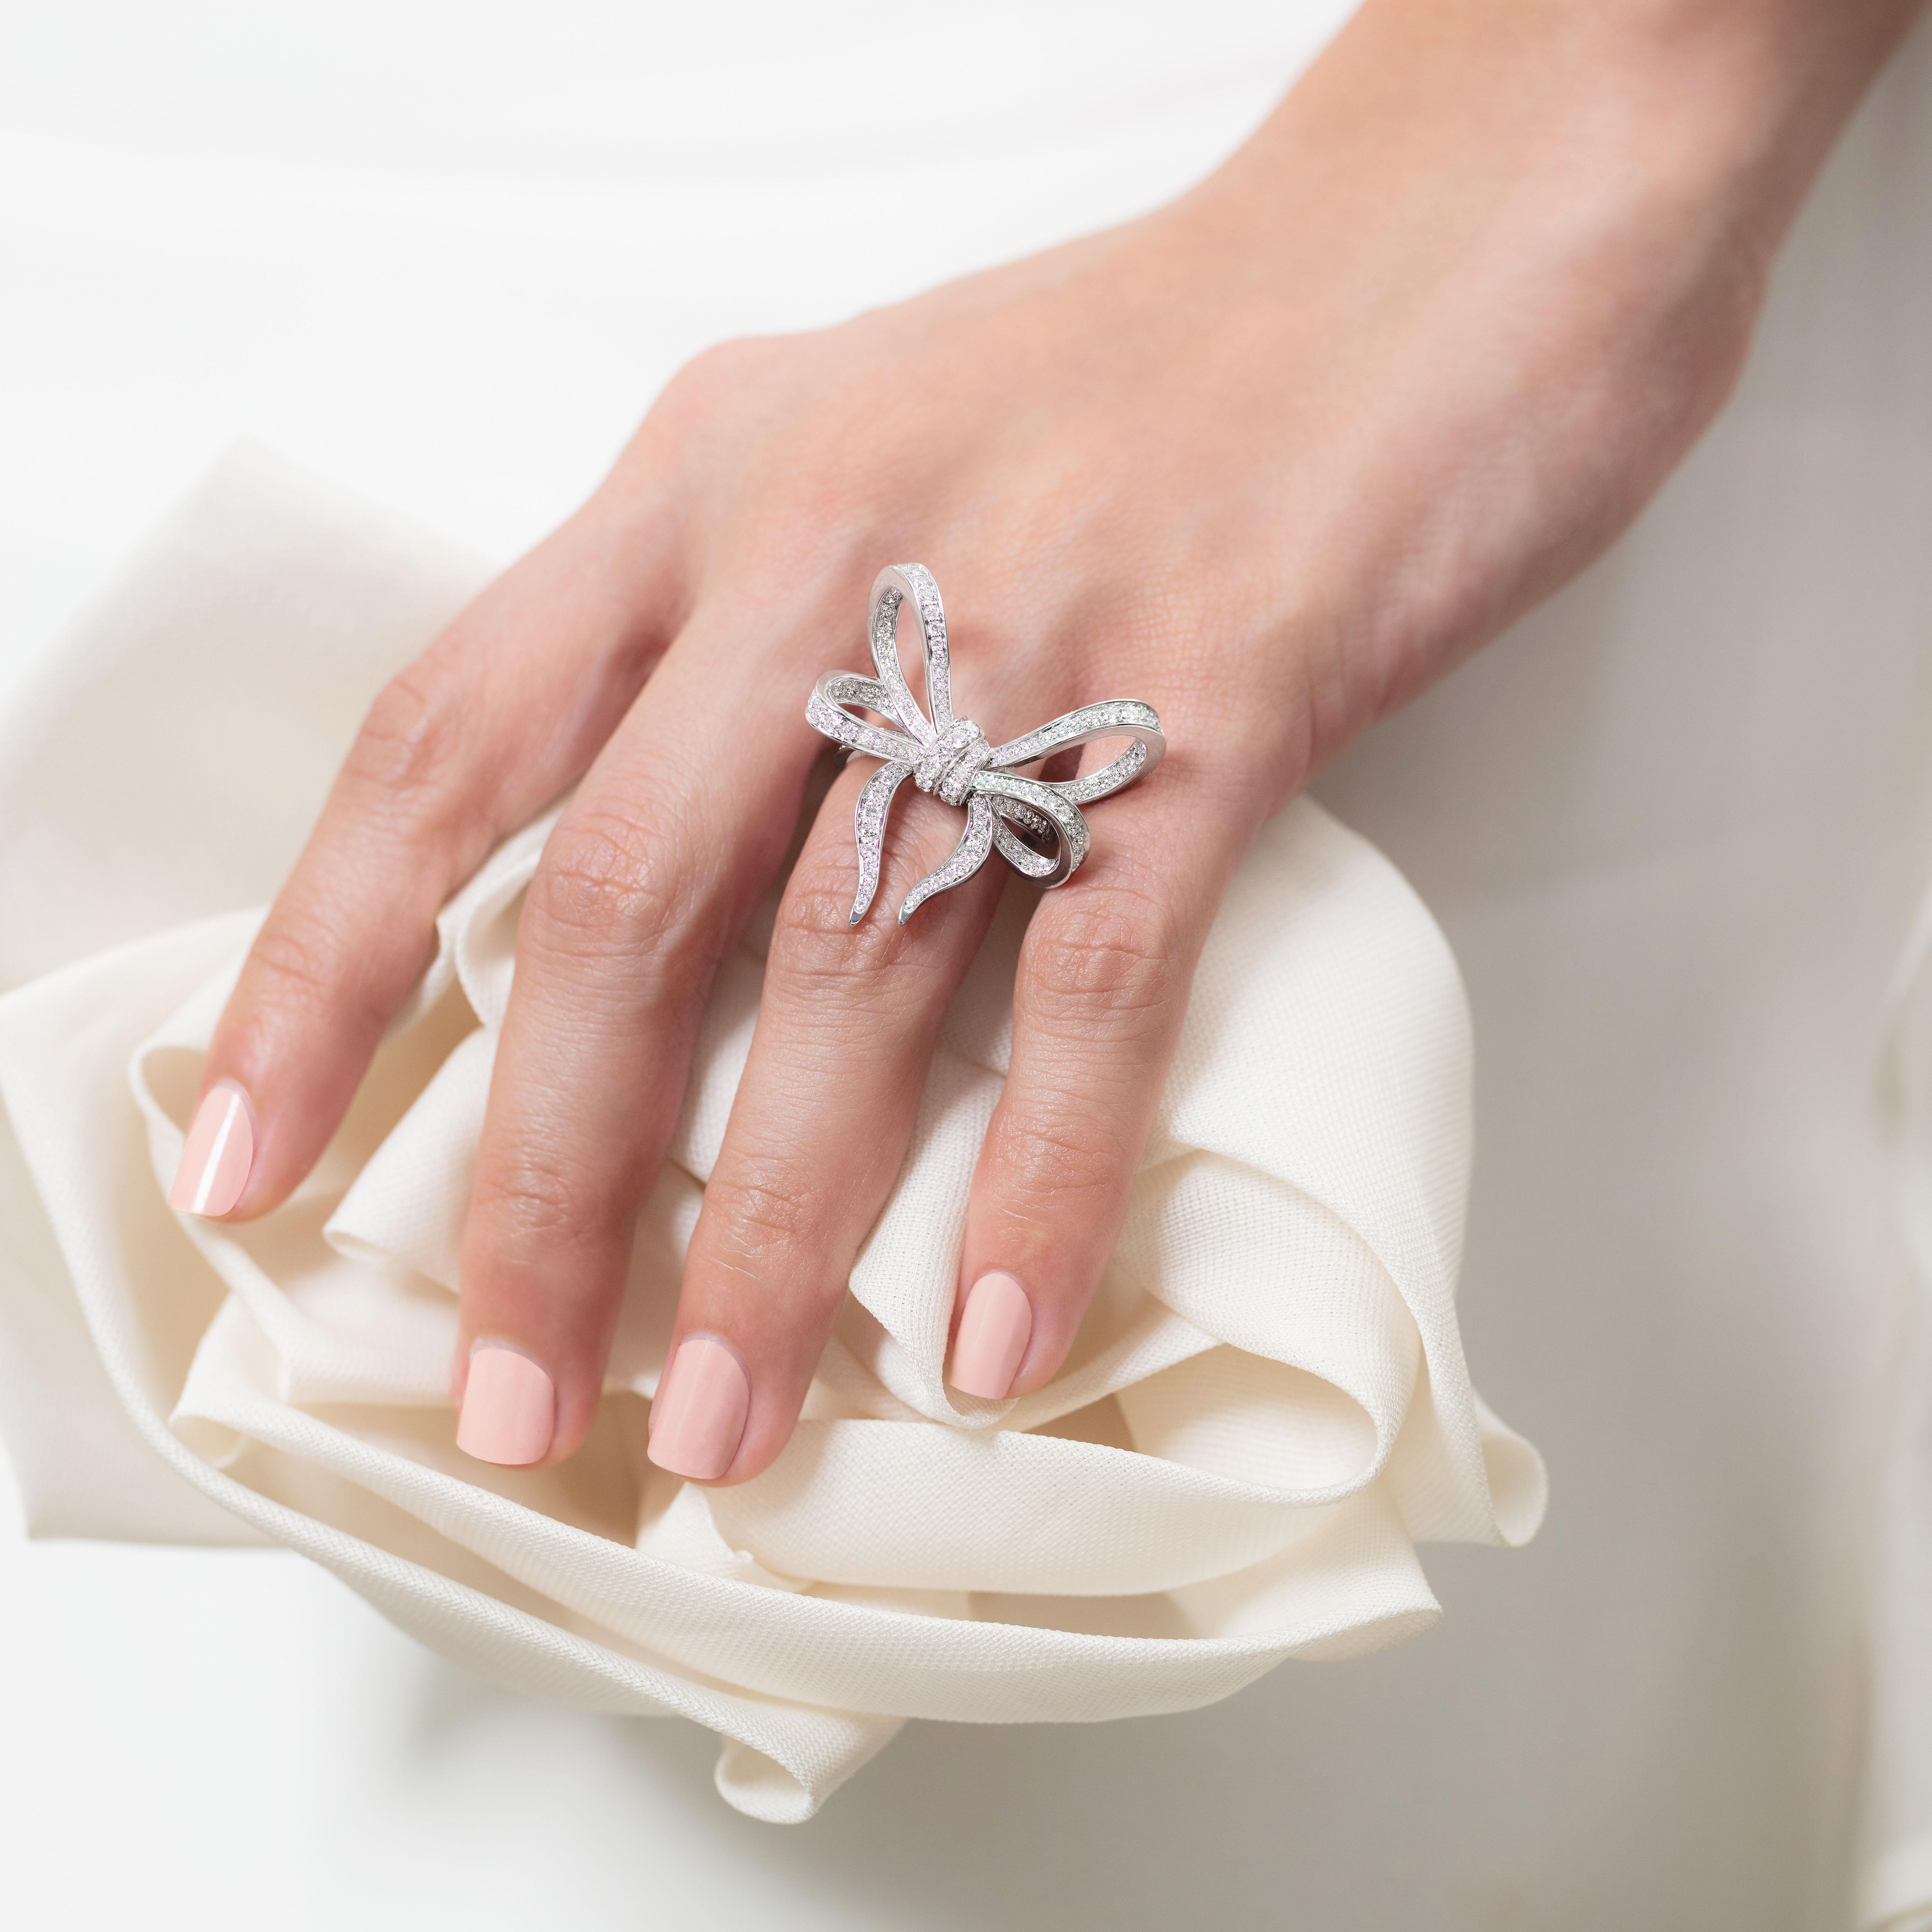 Lyla’s Bow is the first collection designed by Vania Leles. Embodying the spirit of VANLELES’ design, this collection is feminine and timeless, which are a must have for jewellery lovers, and the perfect gift for someone special. Its whimsical style